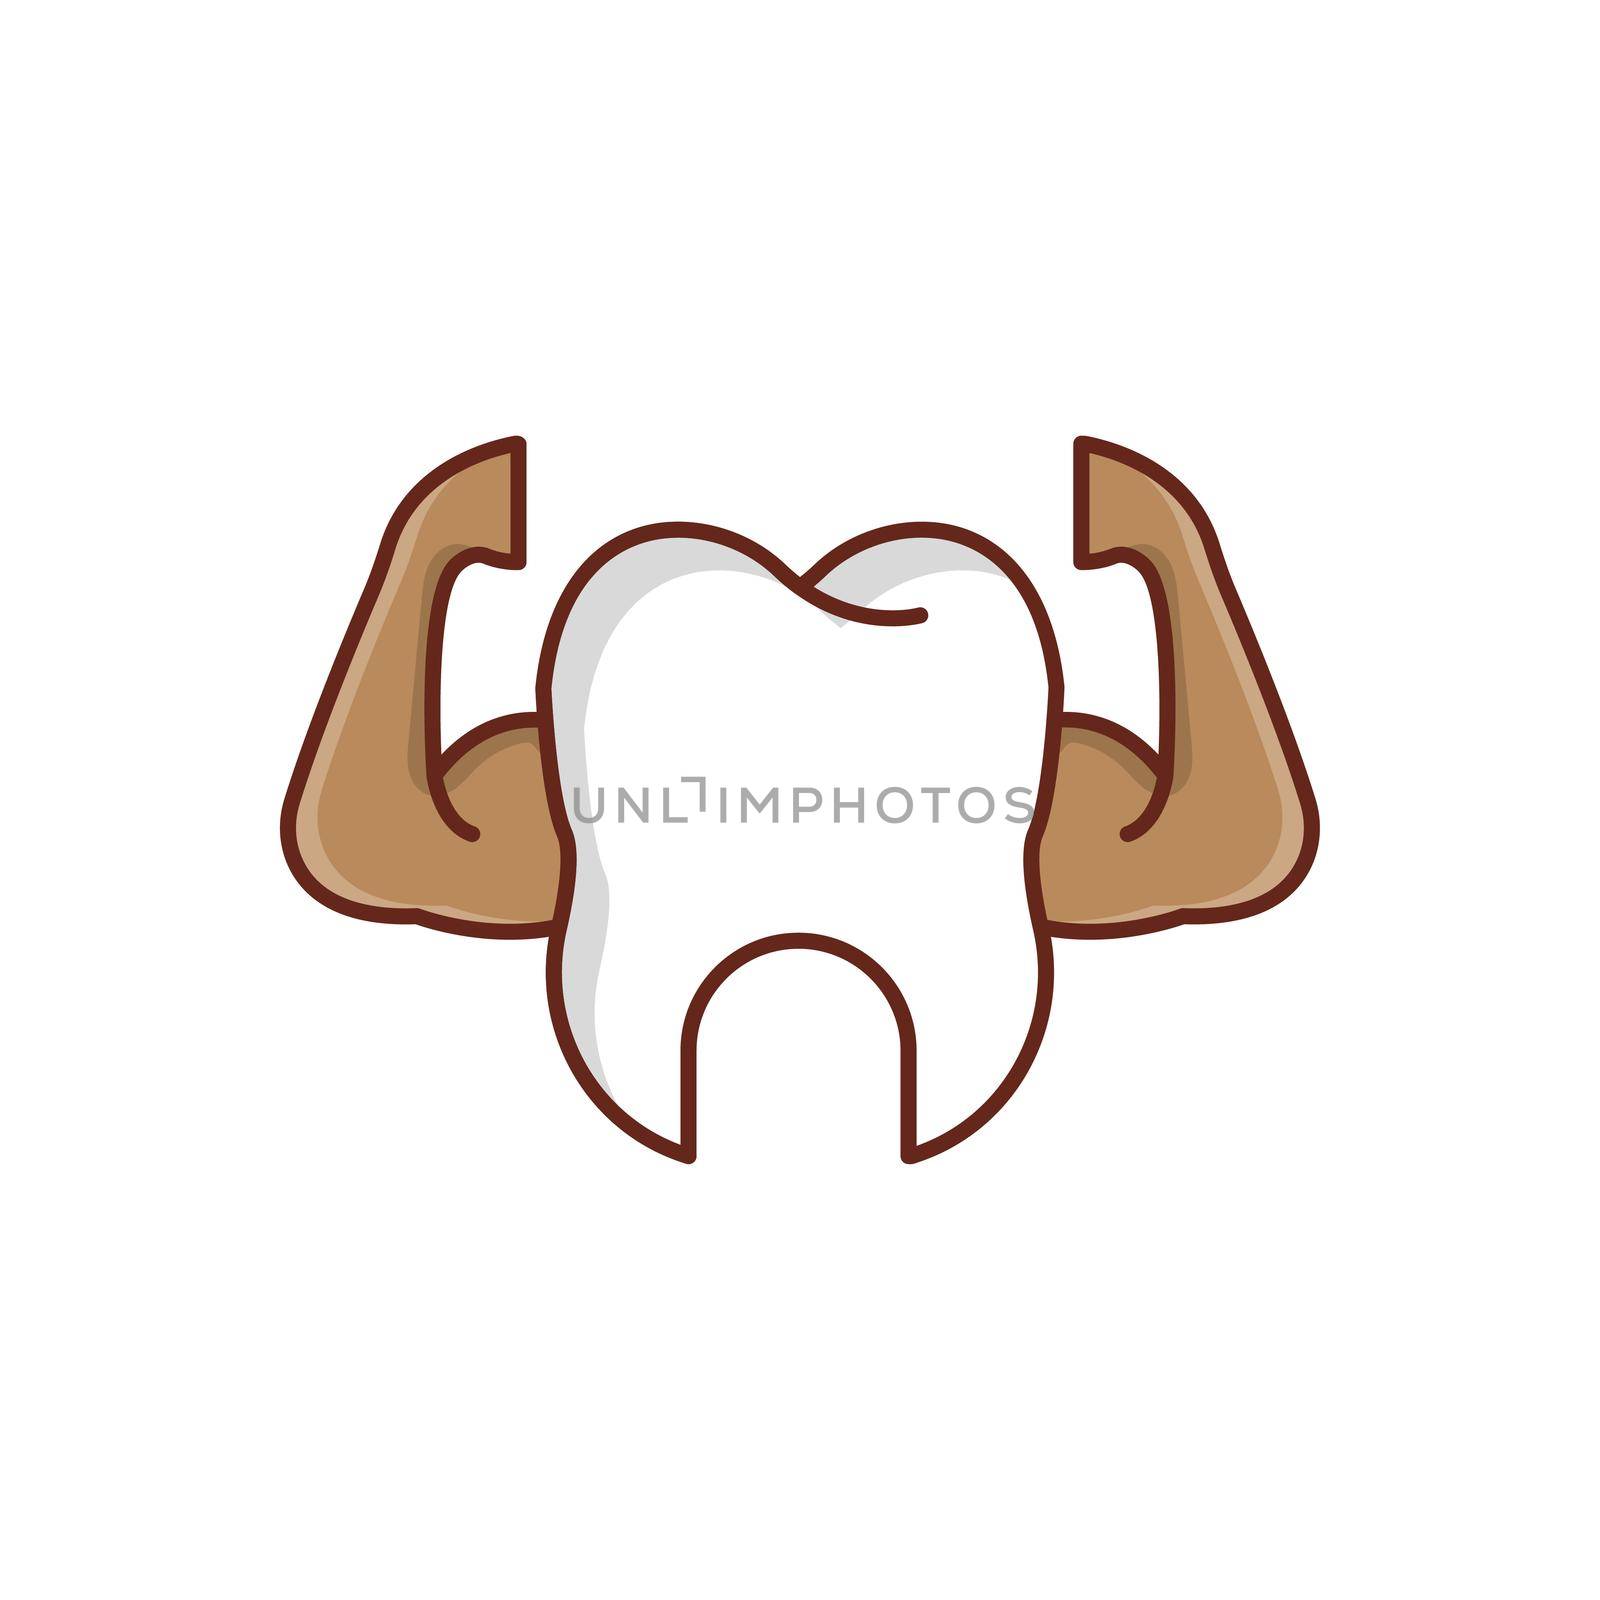 strong by FlaticonsDesign